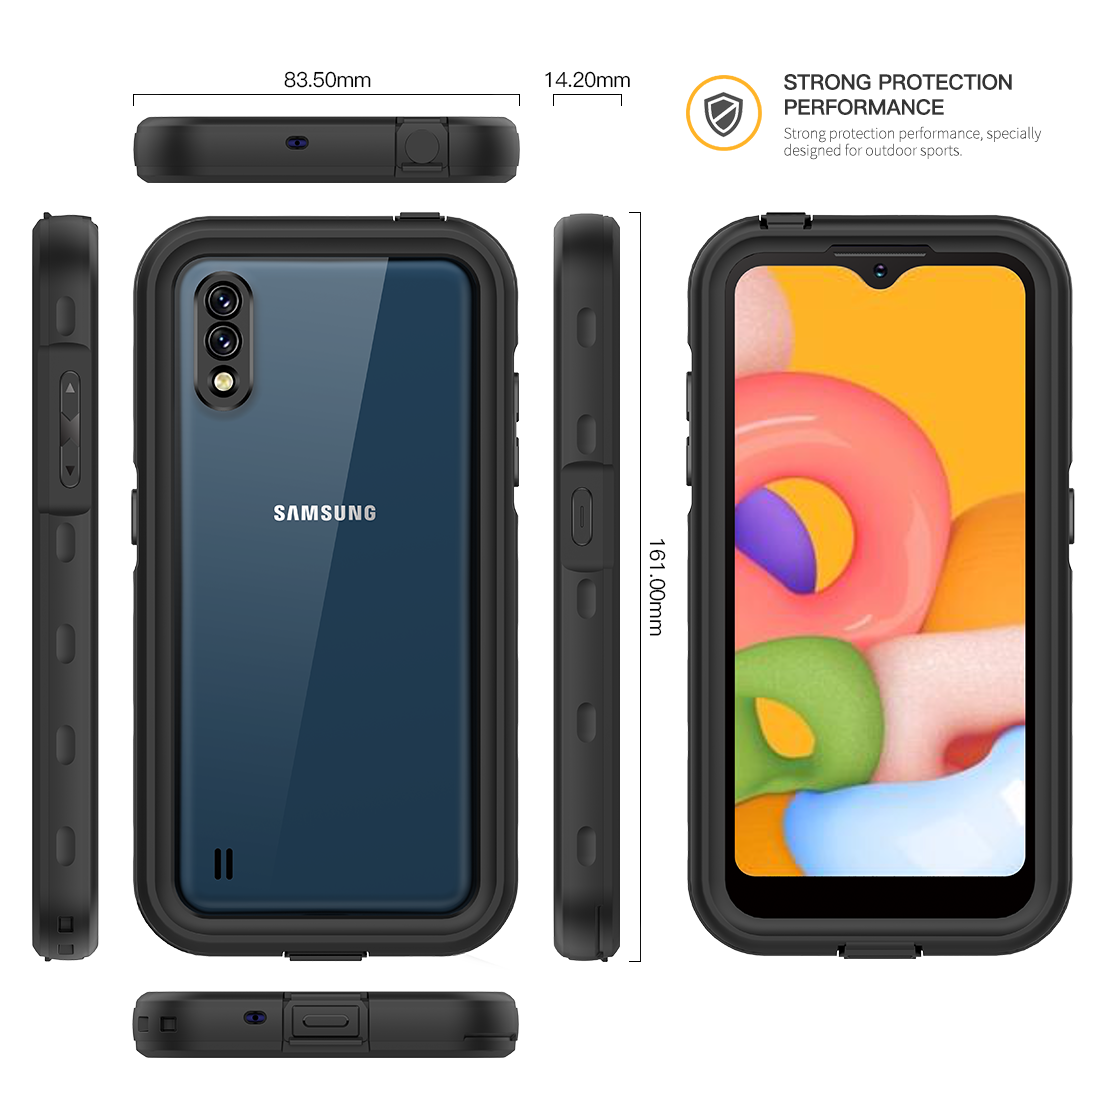 Samsung Galaxy A01 Case Waterproof 4 in 1 Clear IP68 Certification Full Protection